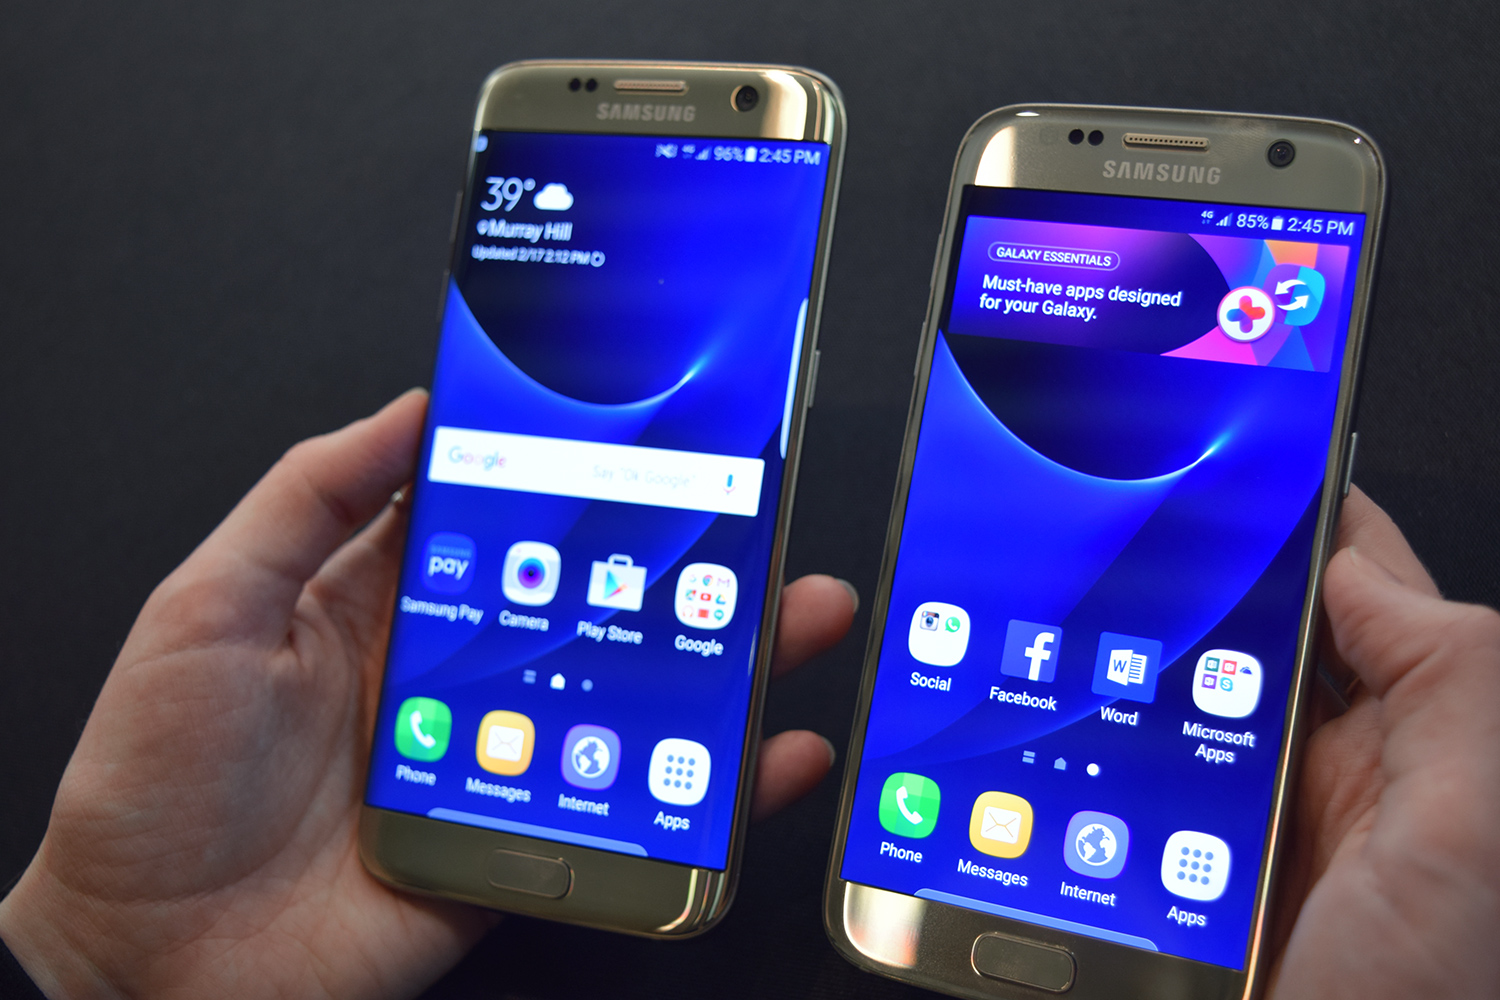 December-security-updates-for-galaxy-s7-and-galaxy-S7-edge